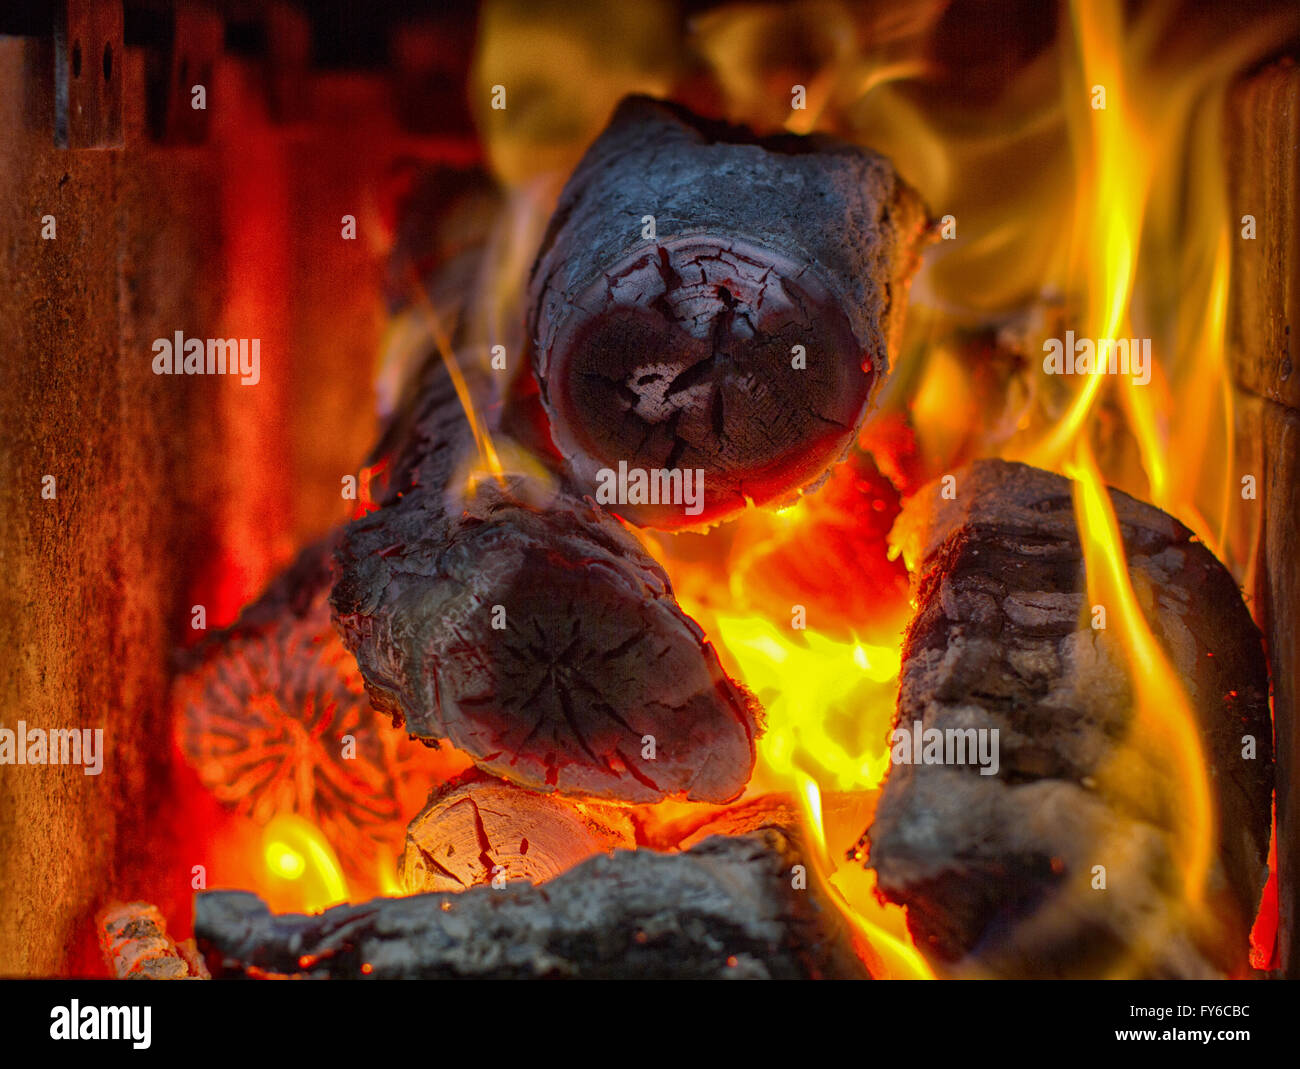 Wood burning stove logs on fire, reds, yellows, oranges and flames. Stock Photo